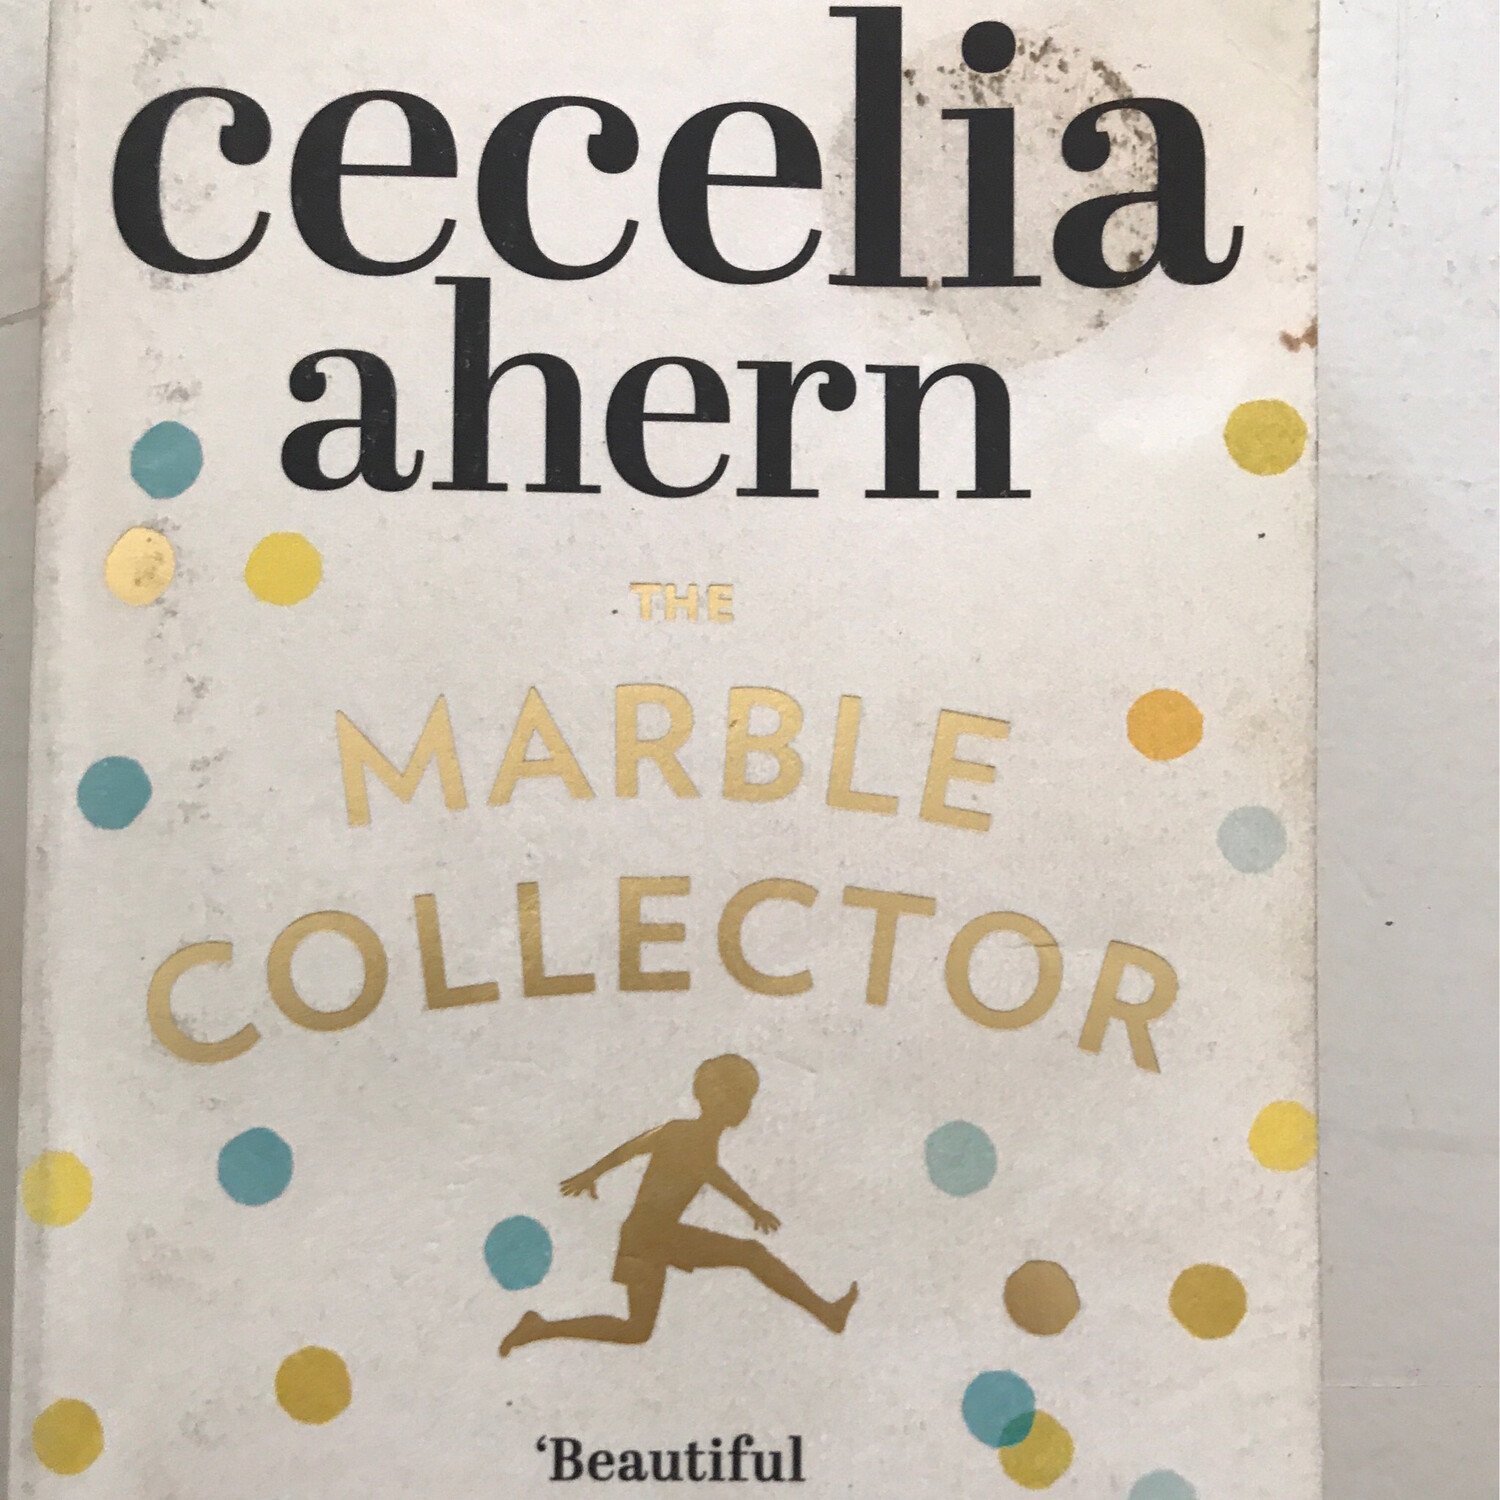 The Marble Collector, Cecelia Ahern